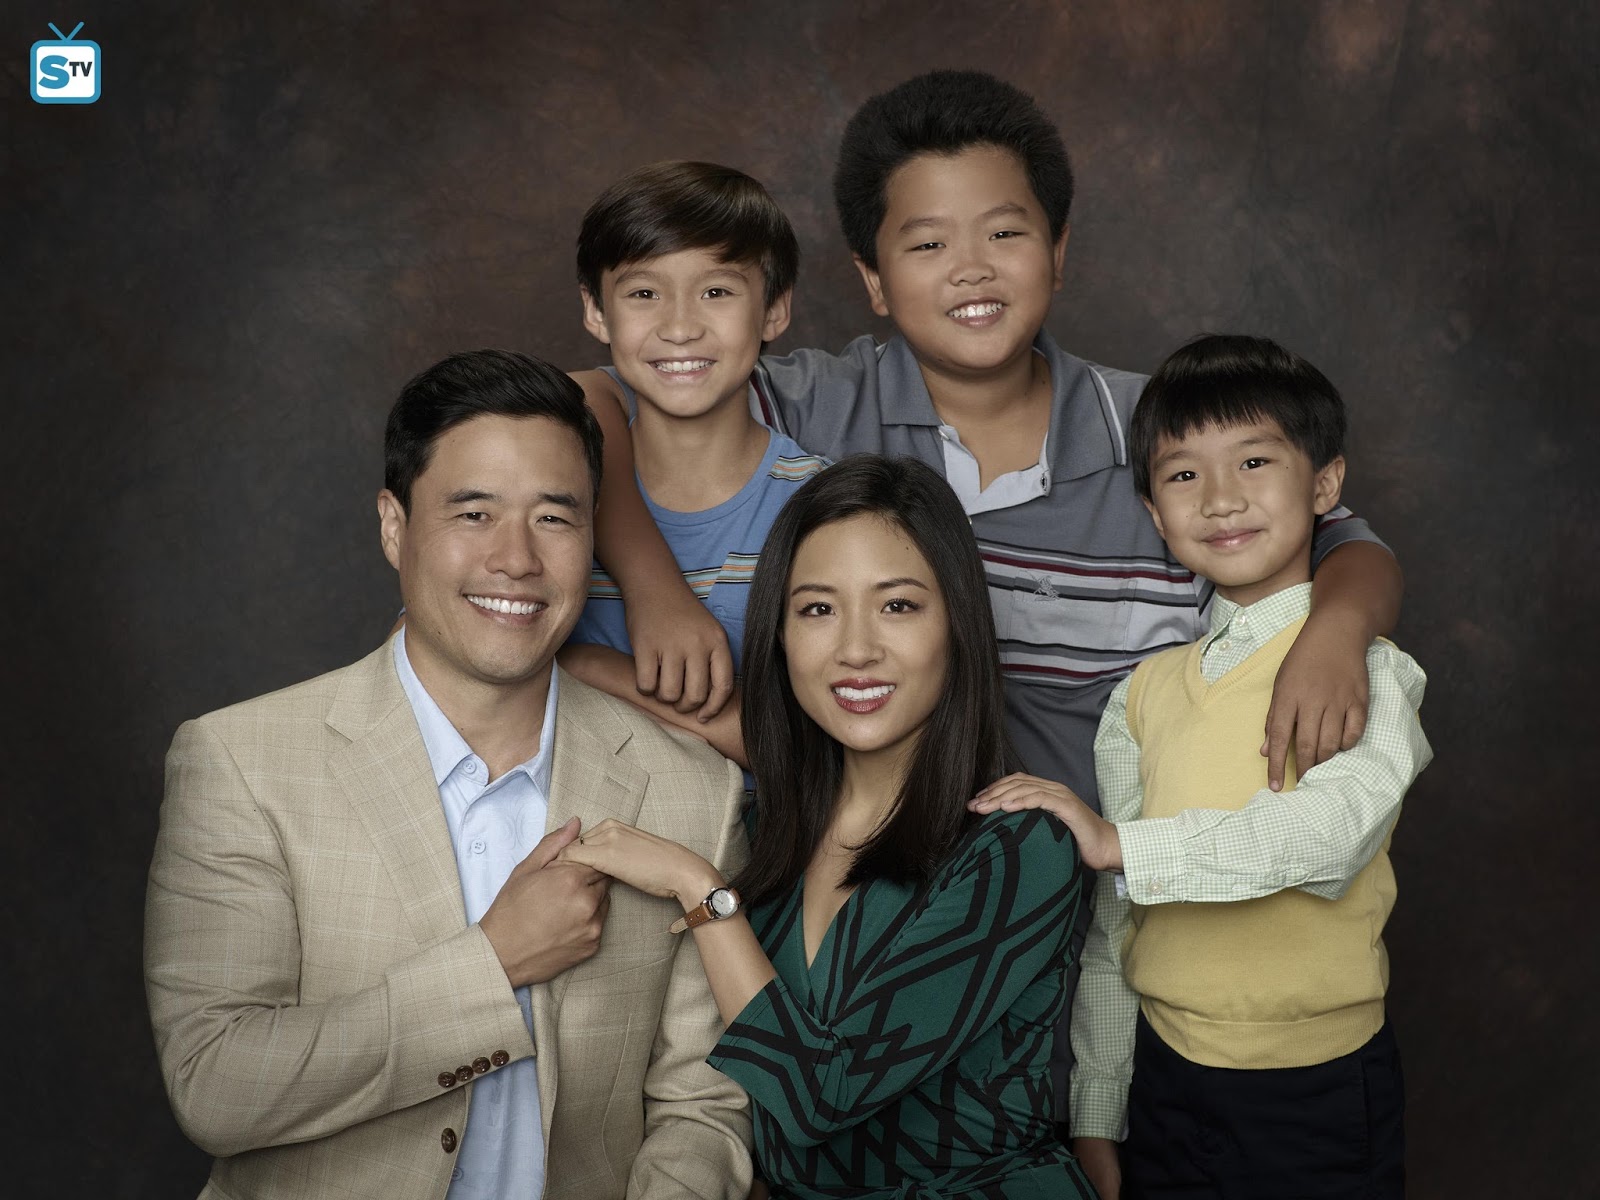 Fresh Off The Boat - Family Business Trip - Advance Preview: "We'll Be Using God's Towel" 